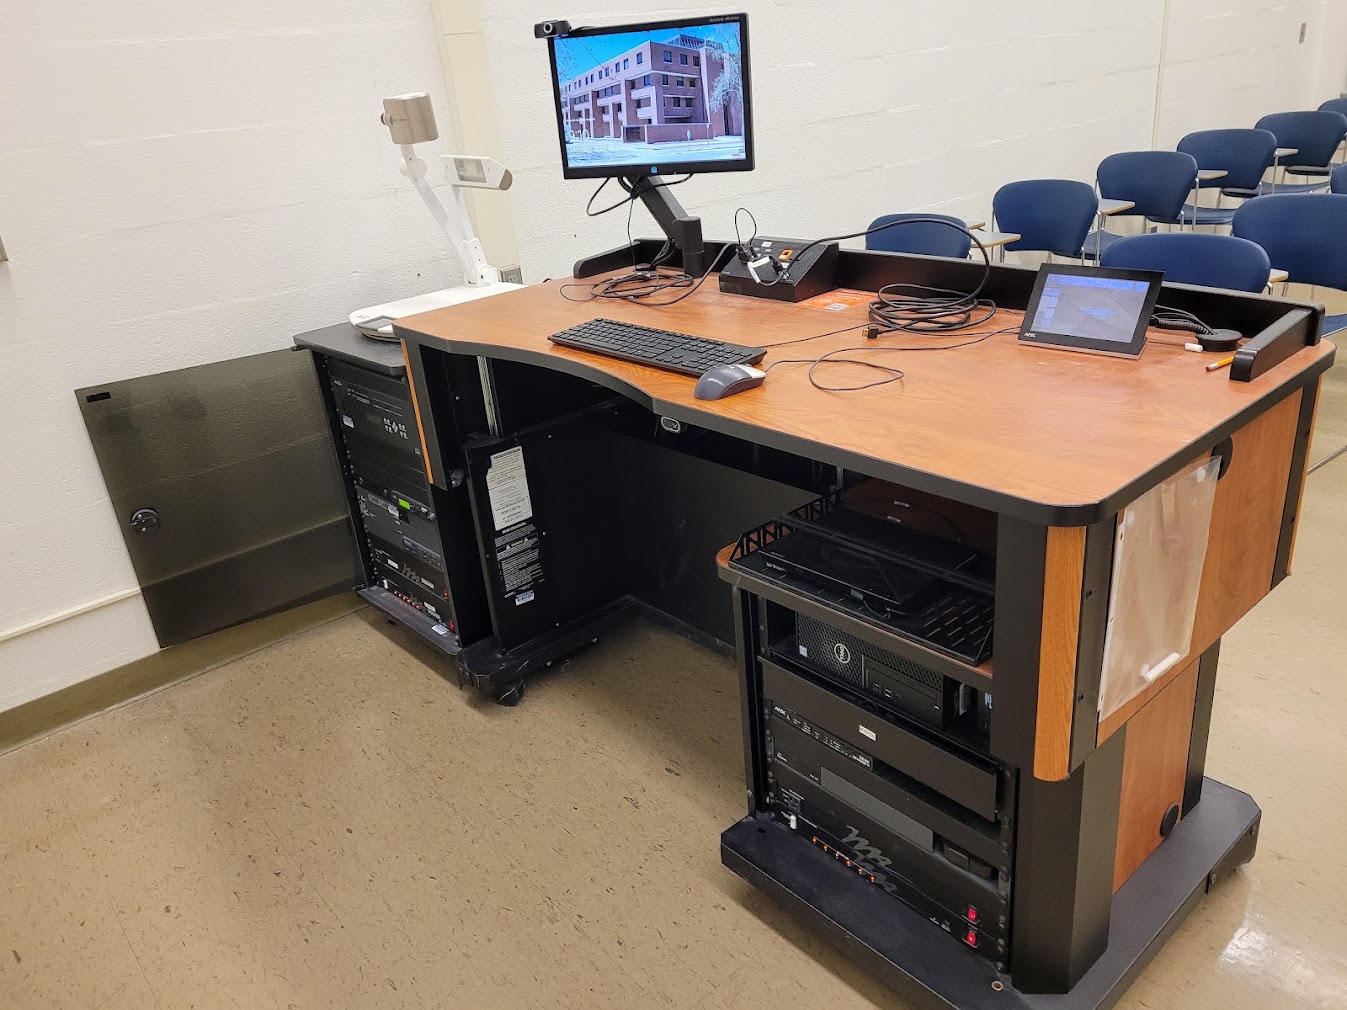 A view of the open cabinet with a computer monitor, VGA and HDMI inputus, a touch panel controller, document camera, and audiovisual rack.